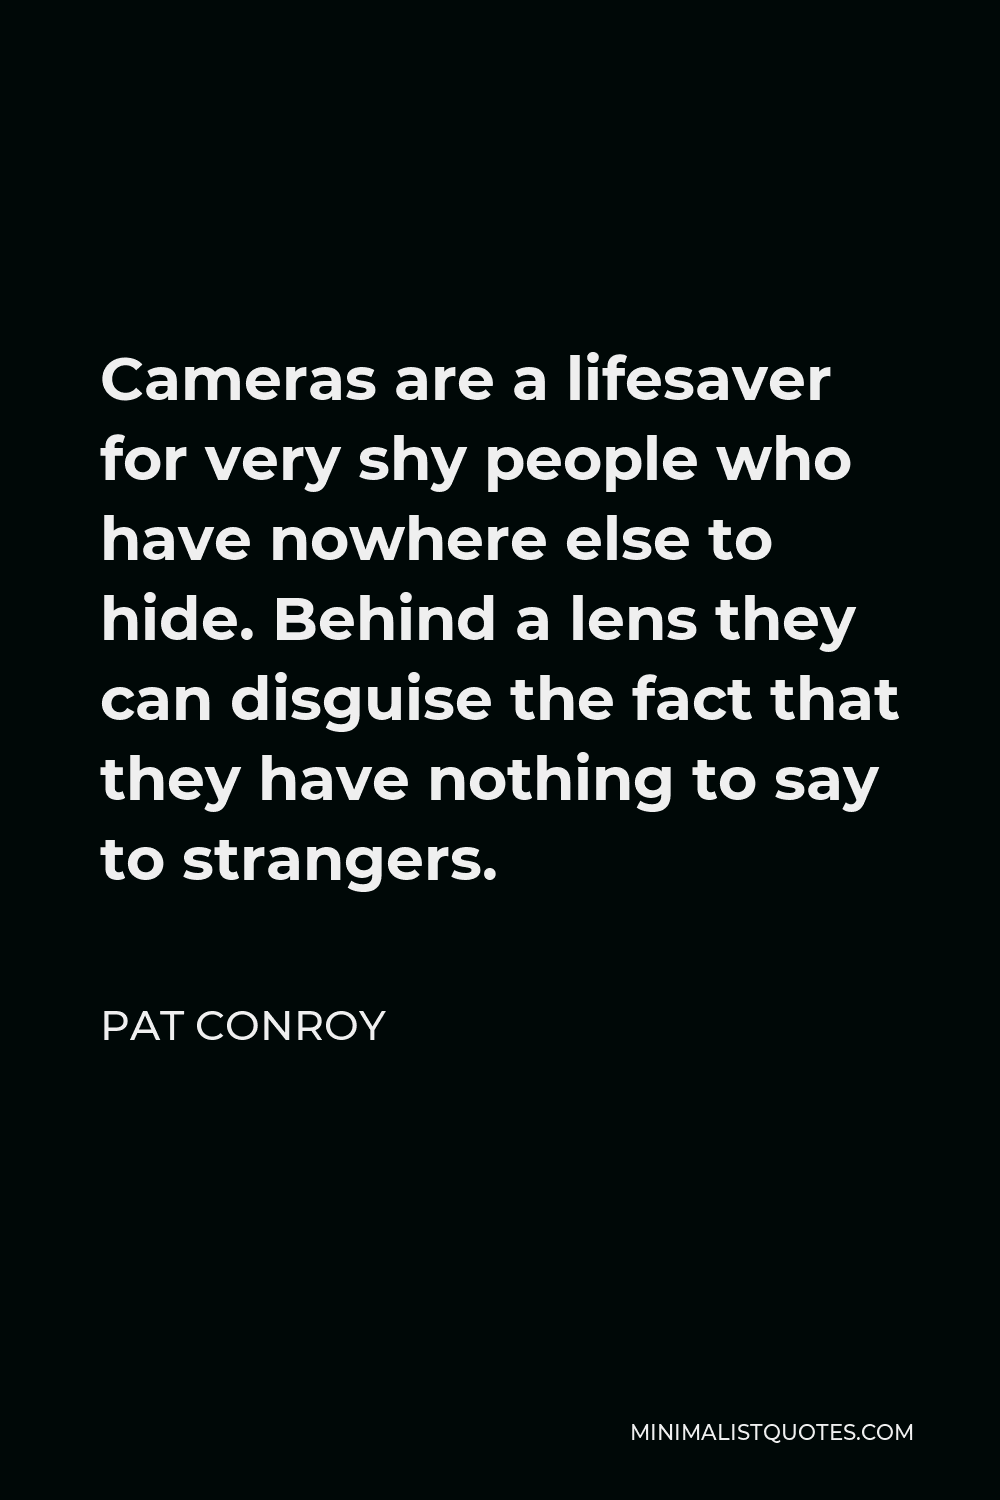 Pat Conroy Quote - Cameras are a lifesaver for very shy people who have nowhere else to hide. Behind a lens they can disguise the fact that they have nothing to say to strangers.